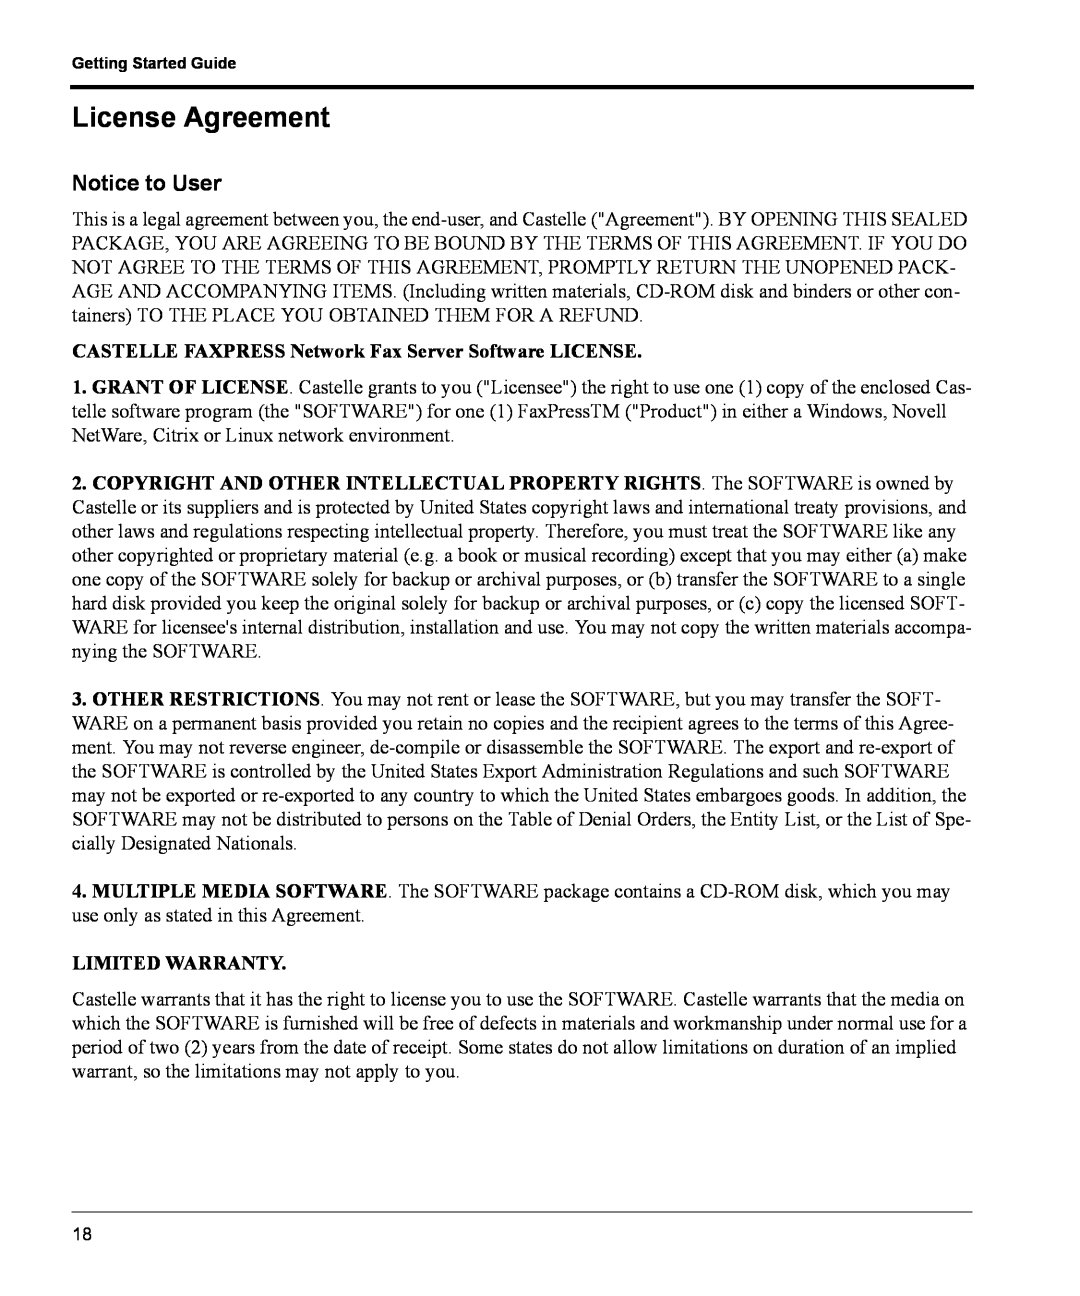 Castelle FaxPress manual License Agreement, Notice to User 